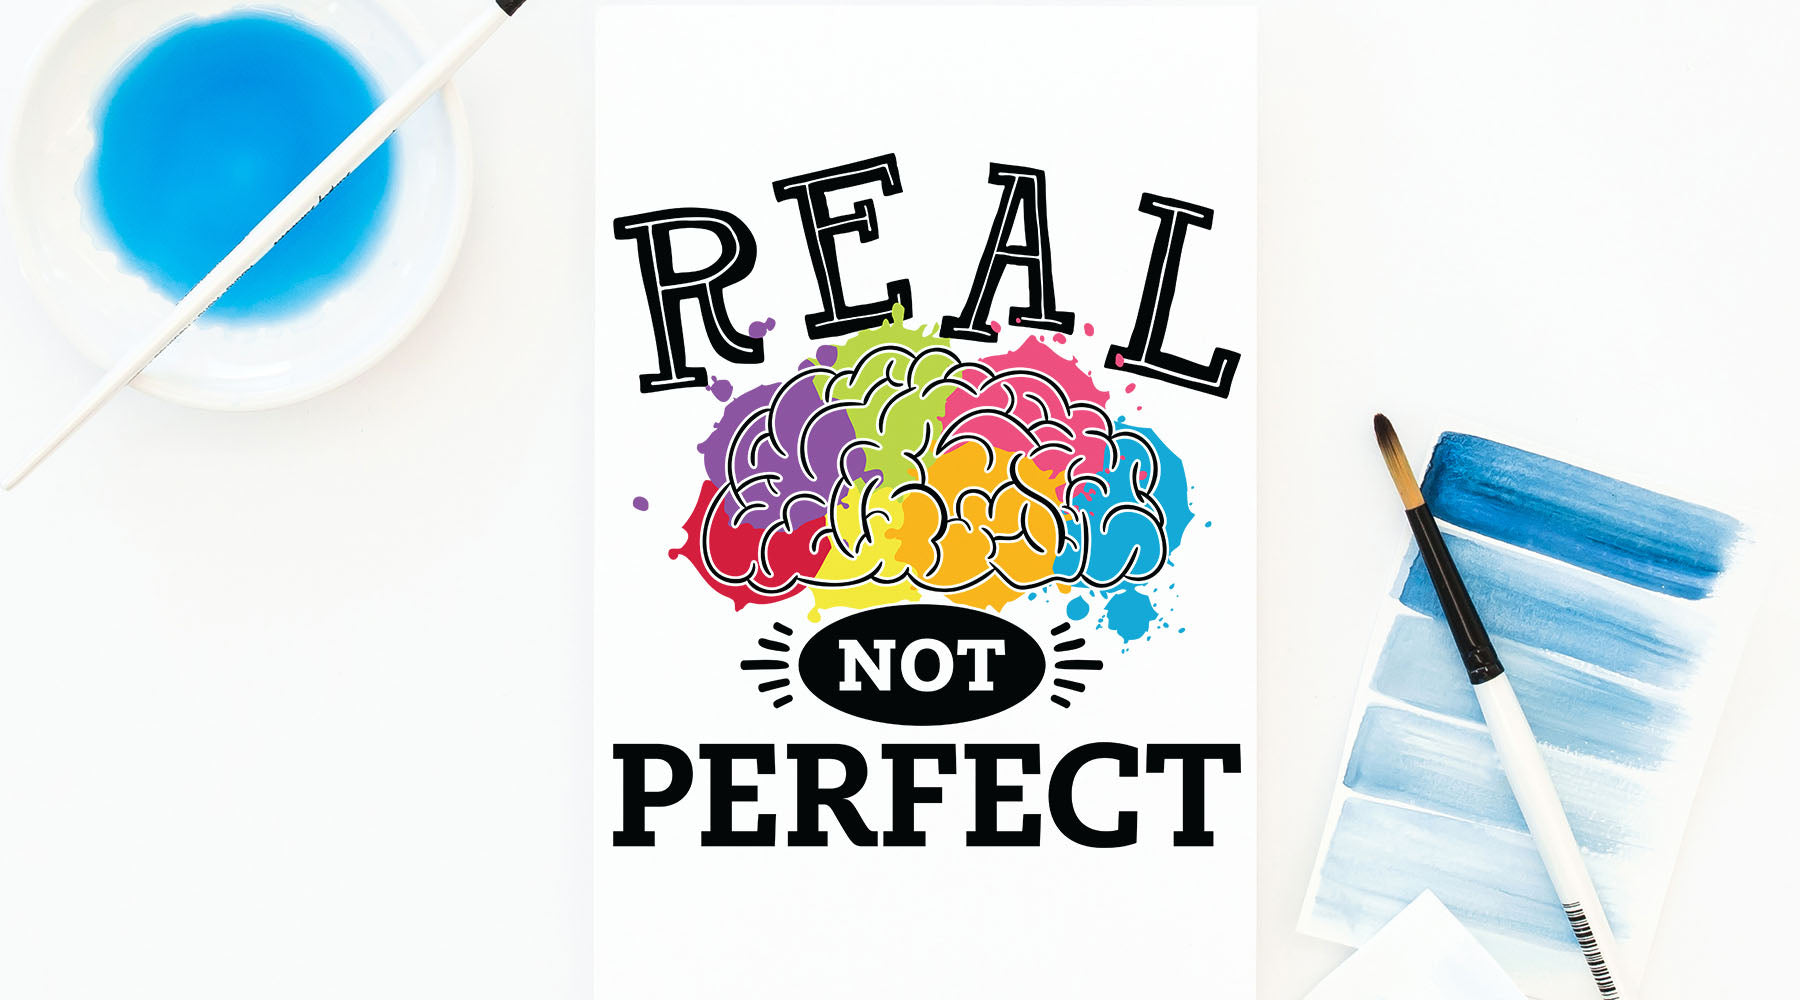 Real Not Perfect Autism and Neurodiversity Awareness Design | SVG DXF EPS PNG Cut Files | Free for Commercial Use